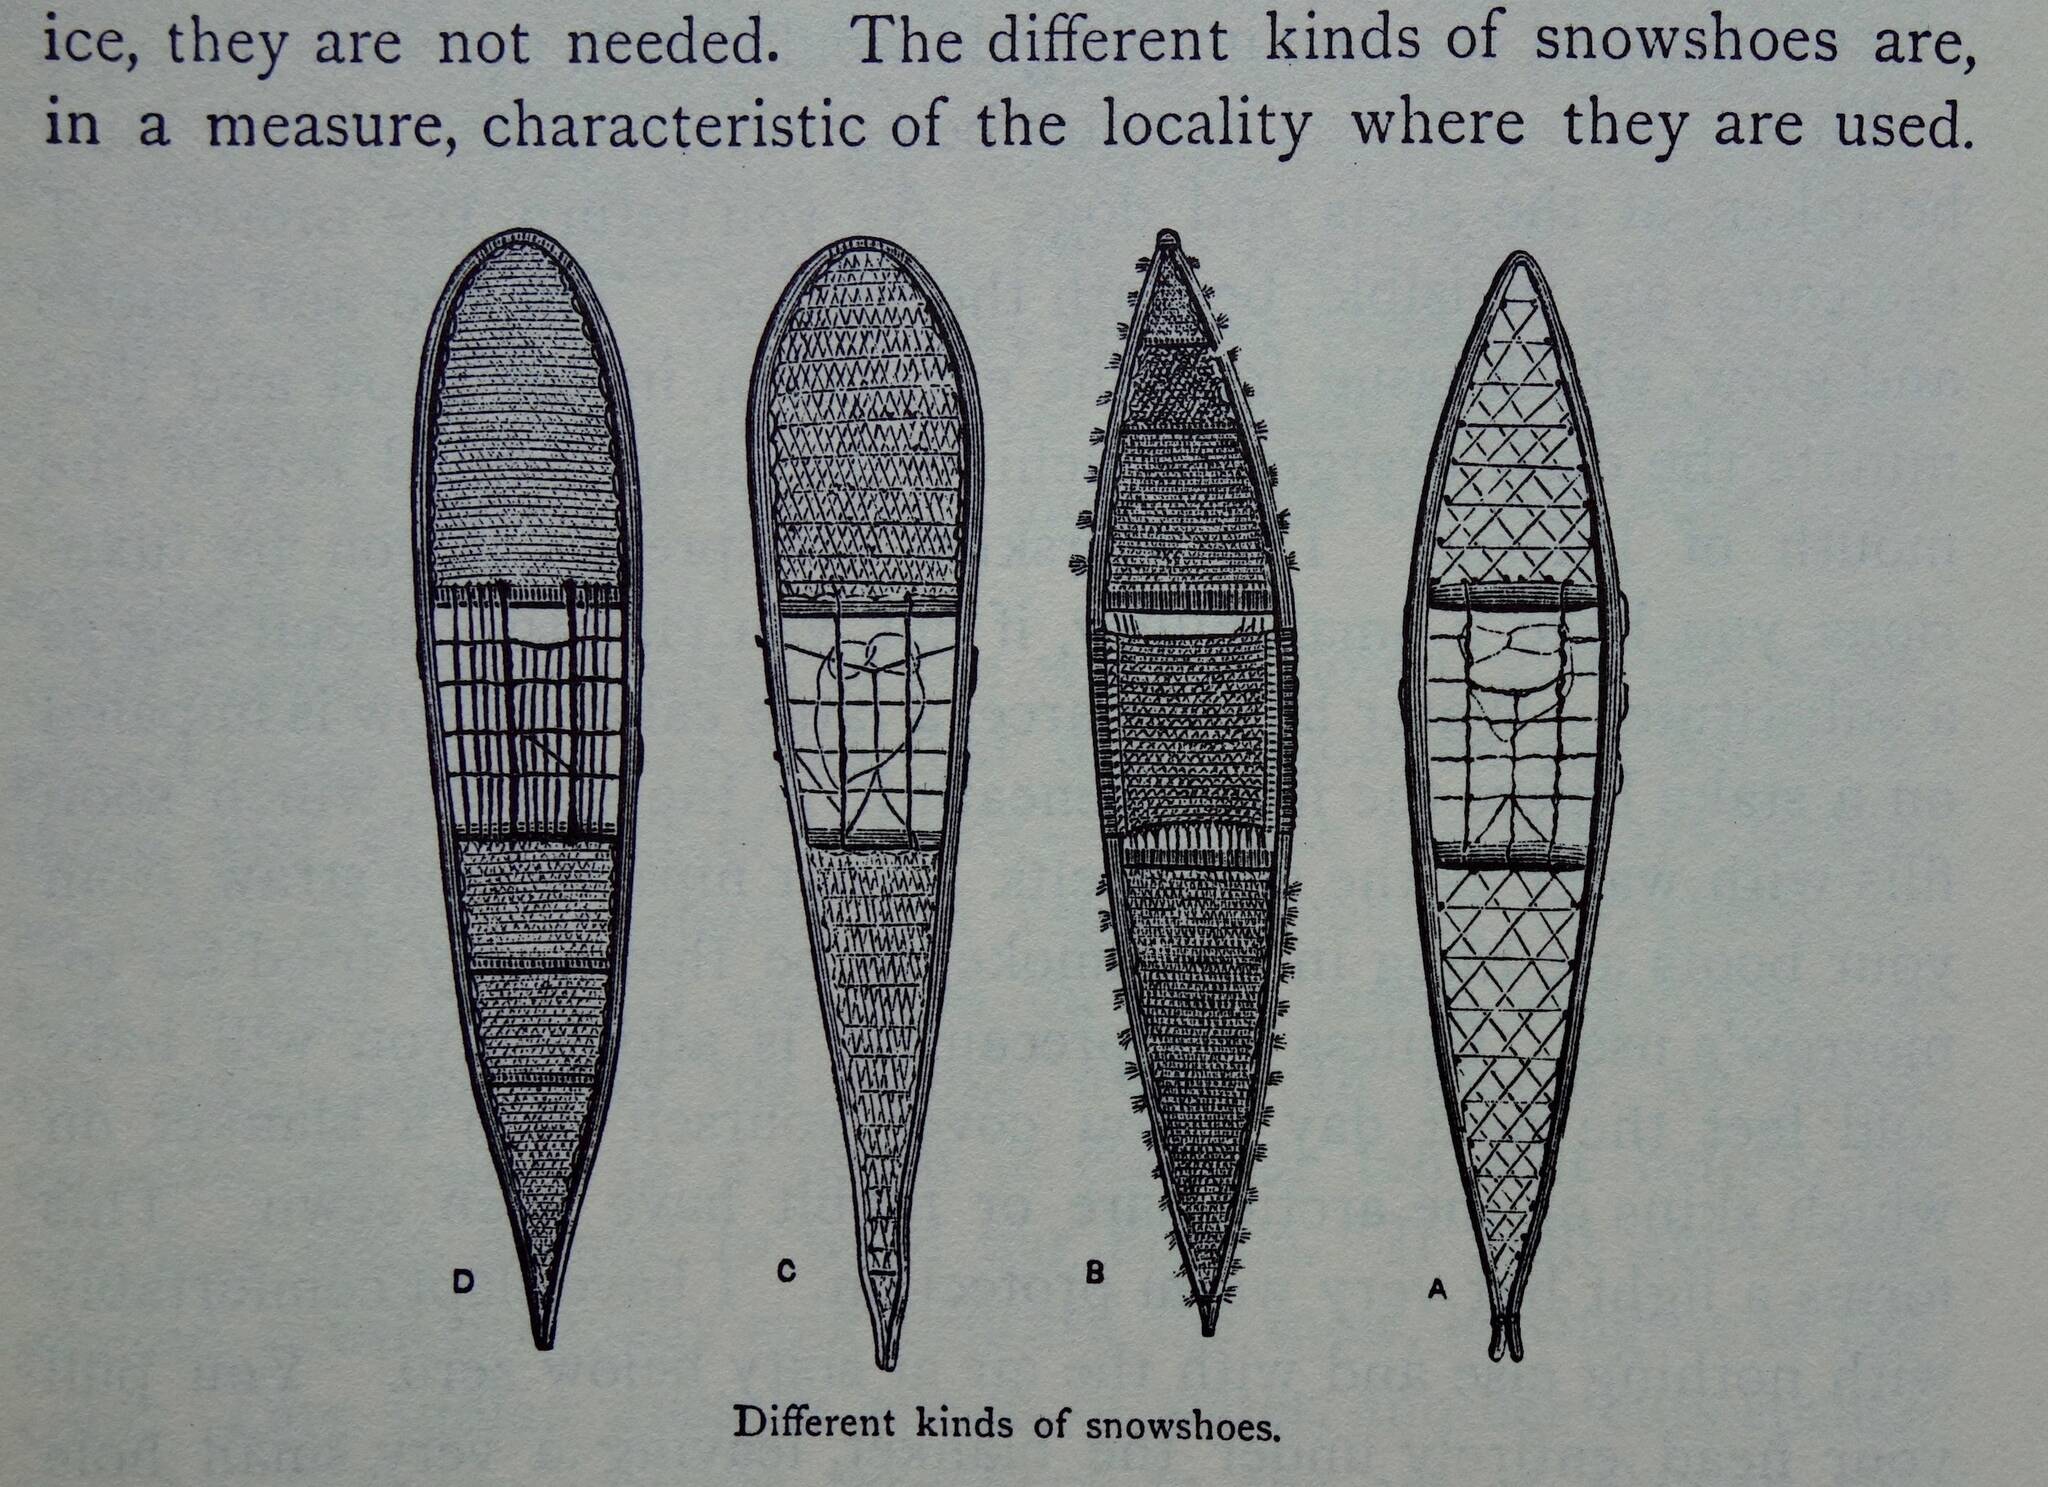 William Dall’s sketch of snowshoes he saw being used in Alaska, from “Alaska and its Resources.”